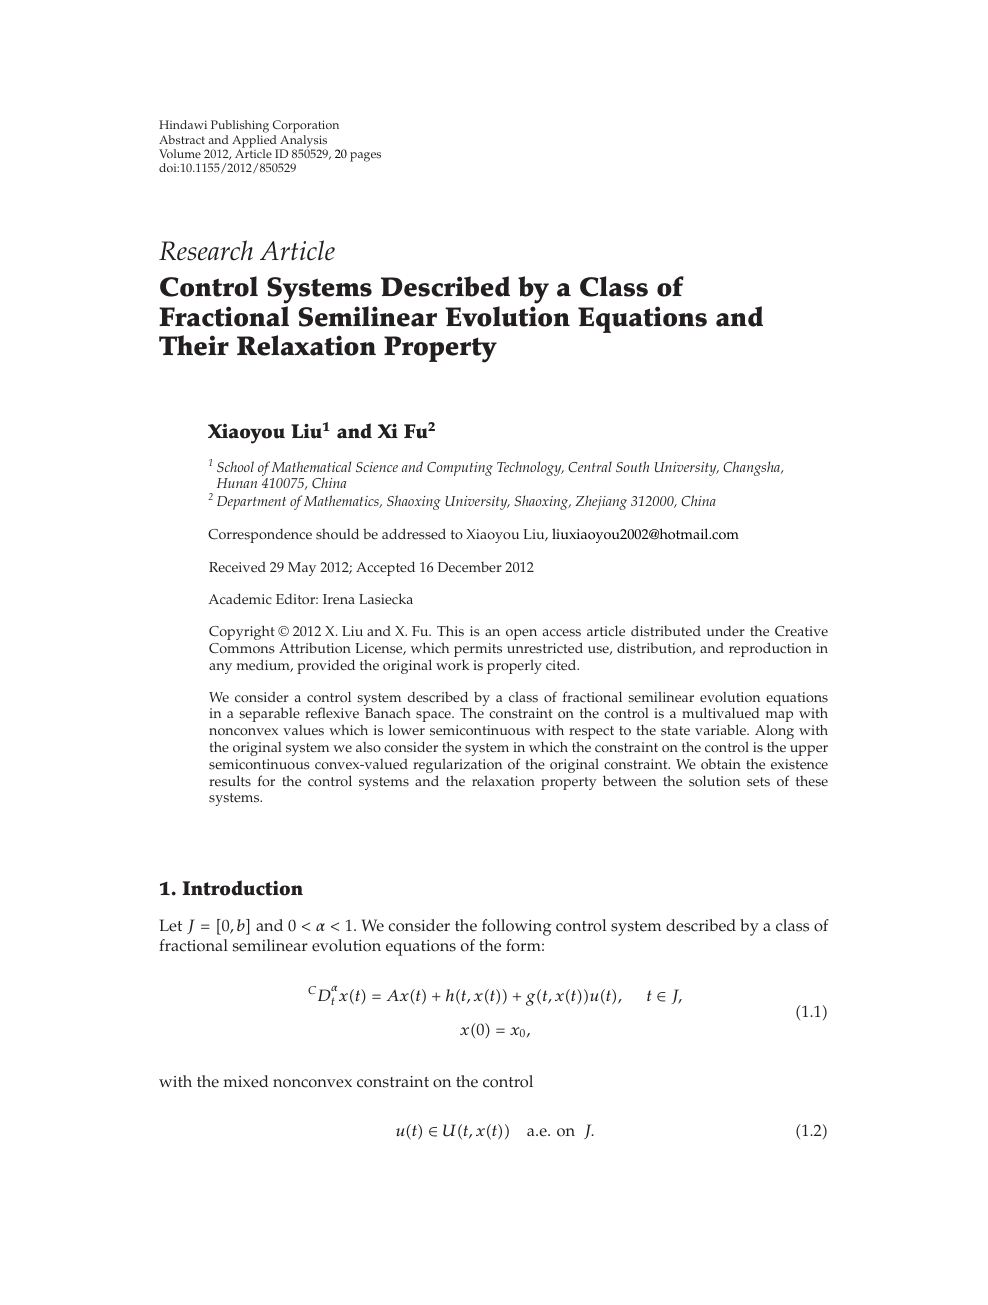 Control Systems Described By A Class Of Fractional Semilinear Evolution Equations And Their Relaxation Property Topic Of Research Paper In Mathematics Download Scholarly Article Pdf And Read For Free On Cyberleninka